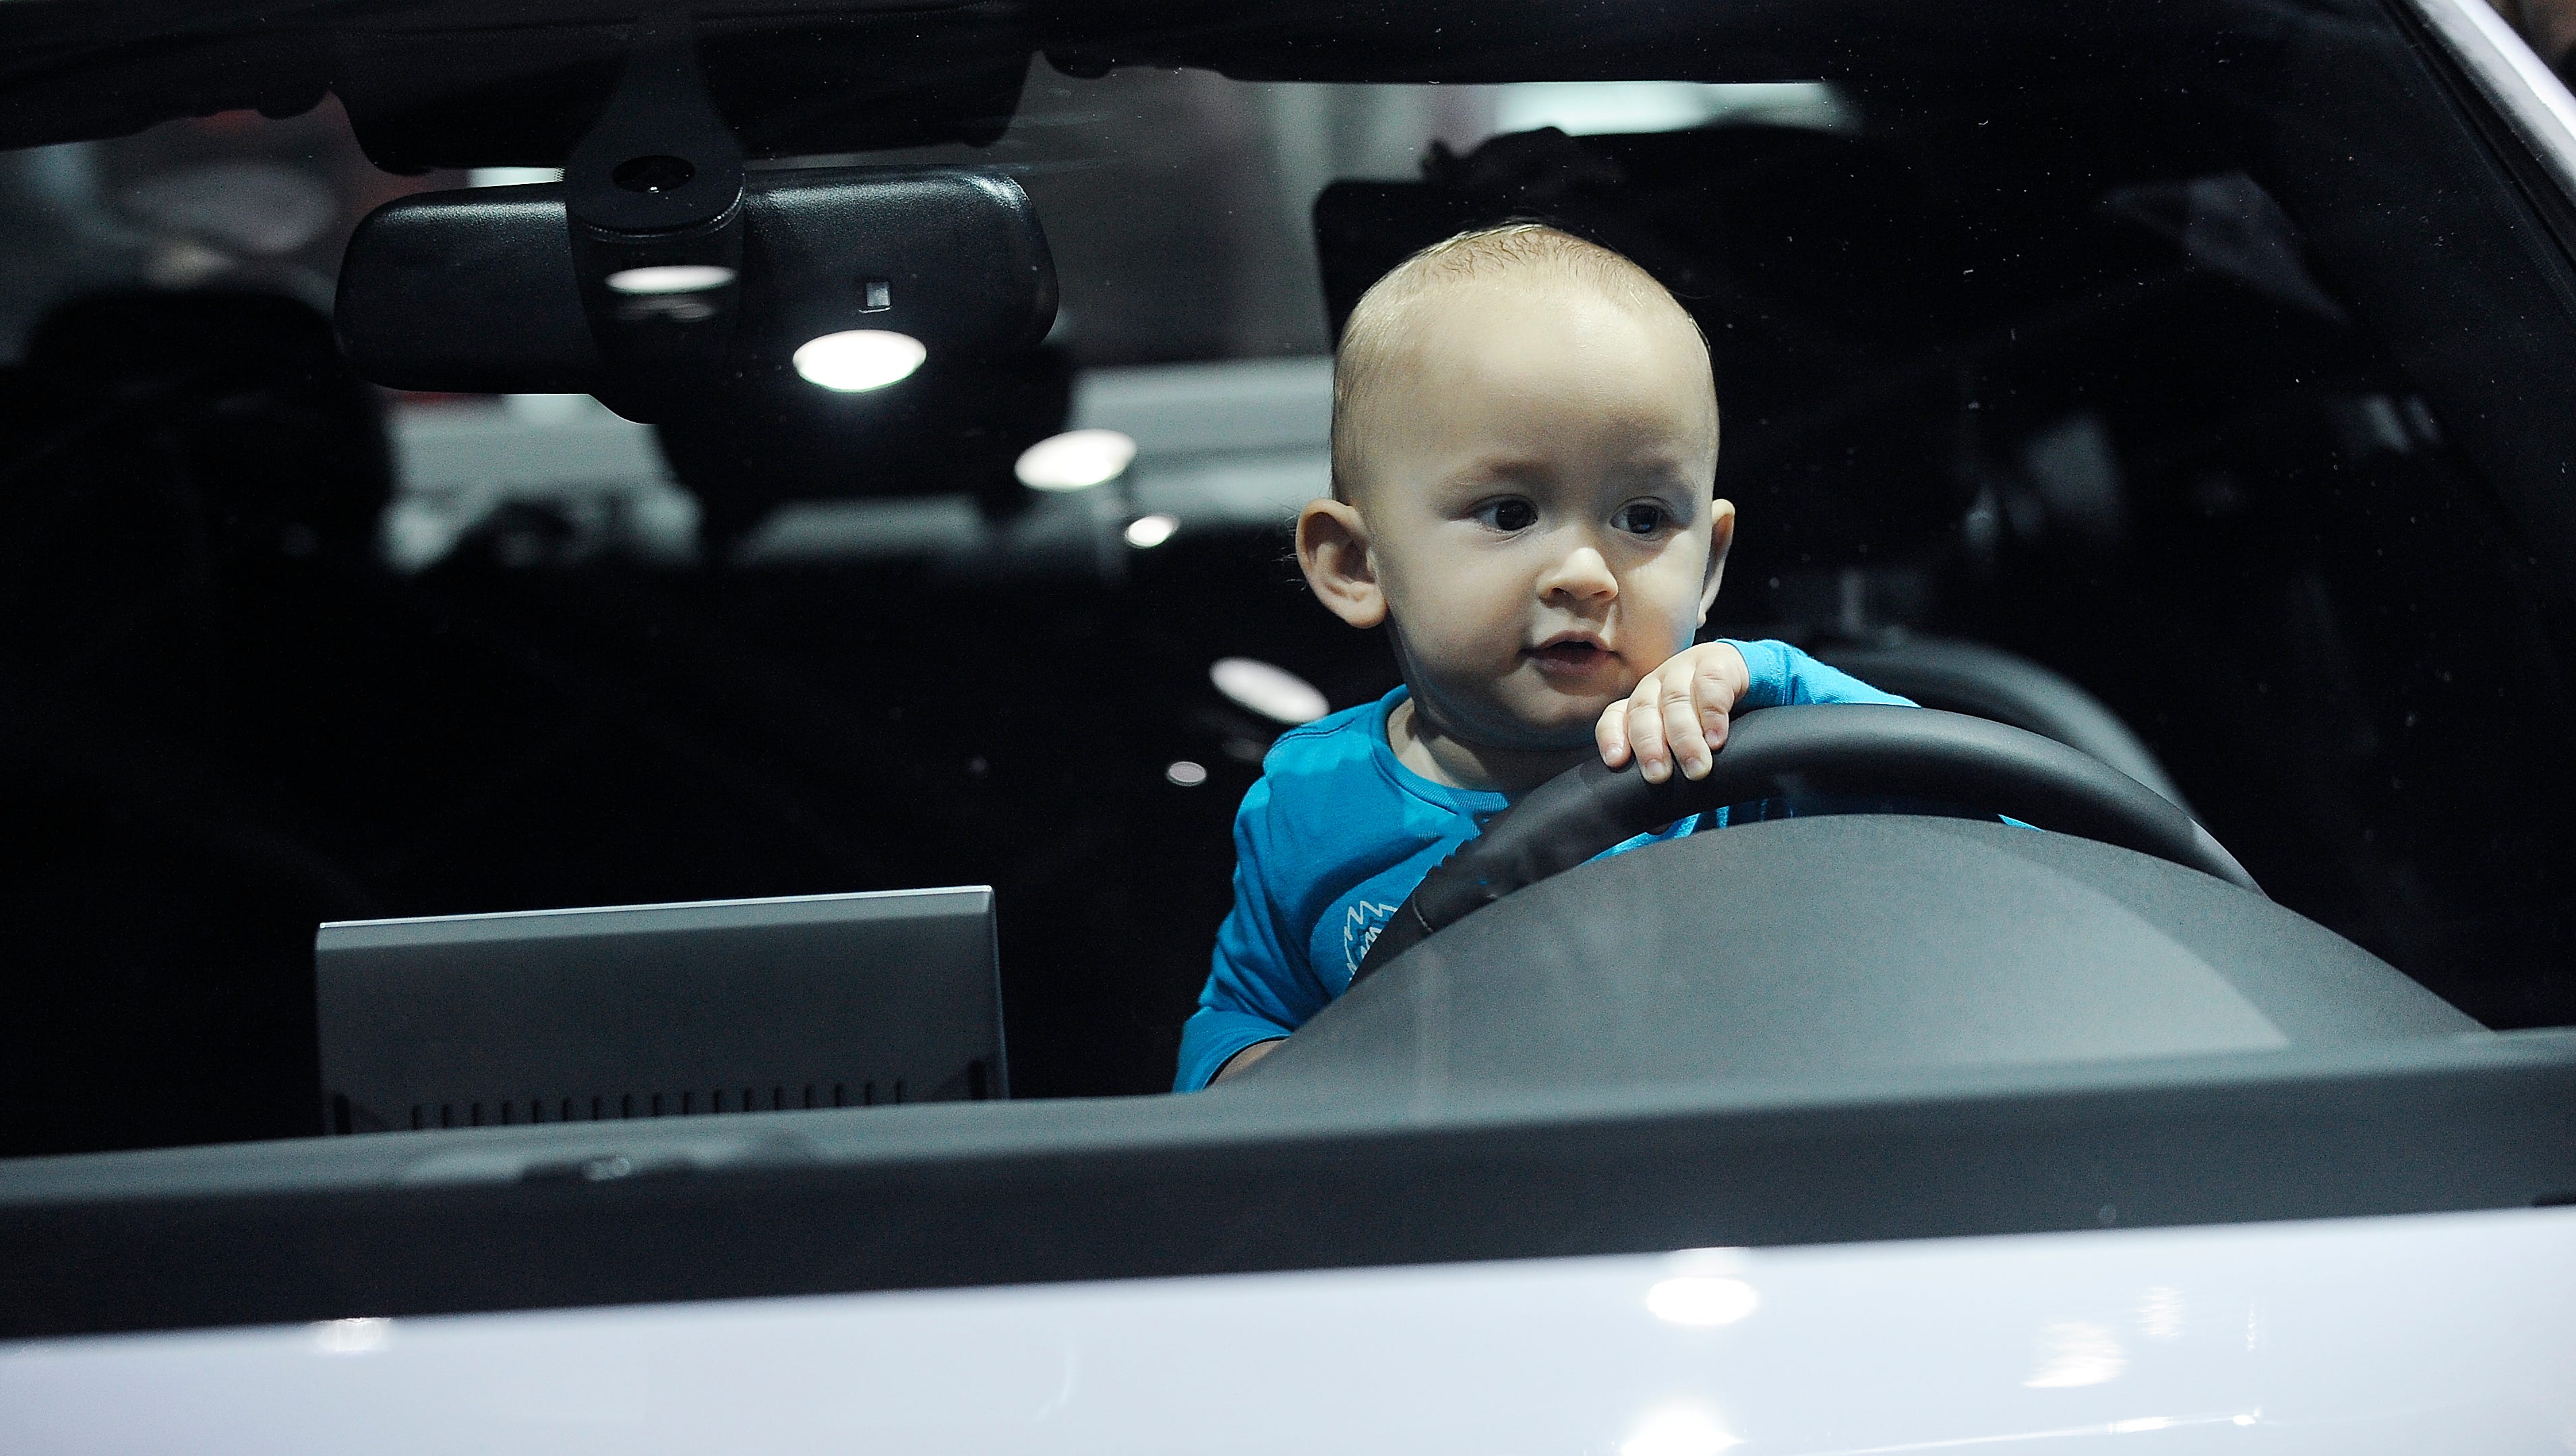 Aron Kleiman, 1, of Toronto, Ontario, sits behind the wheel of the 2018 Audi A6 Quattro at Cobo Center on Sunday, January 21, 2018, for the second public day for the North American International Auto Show.